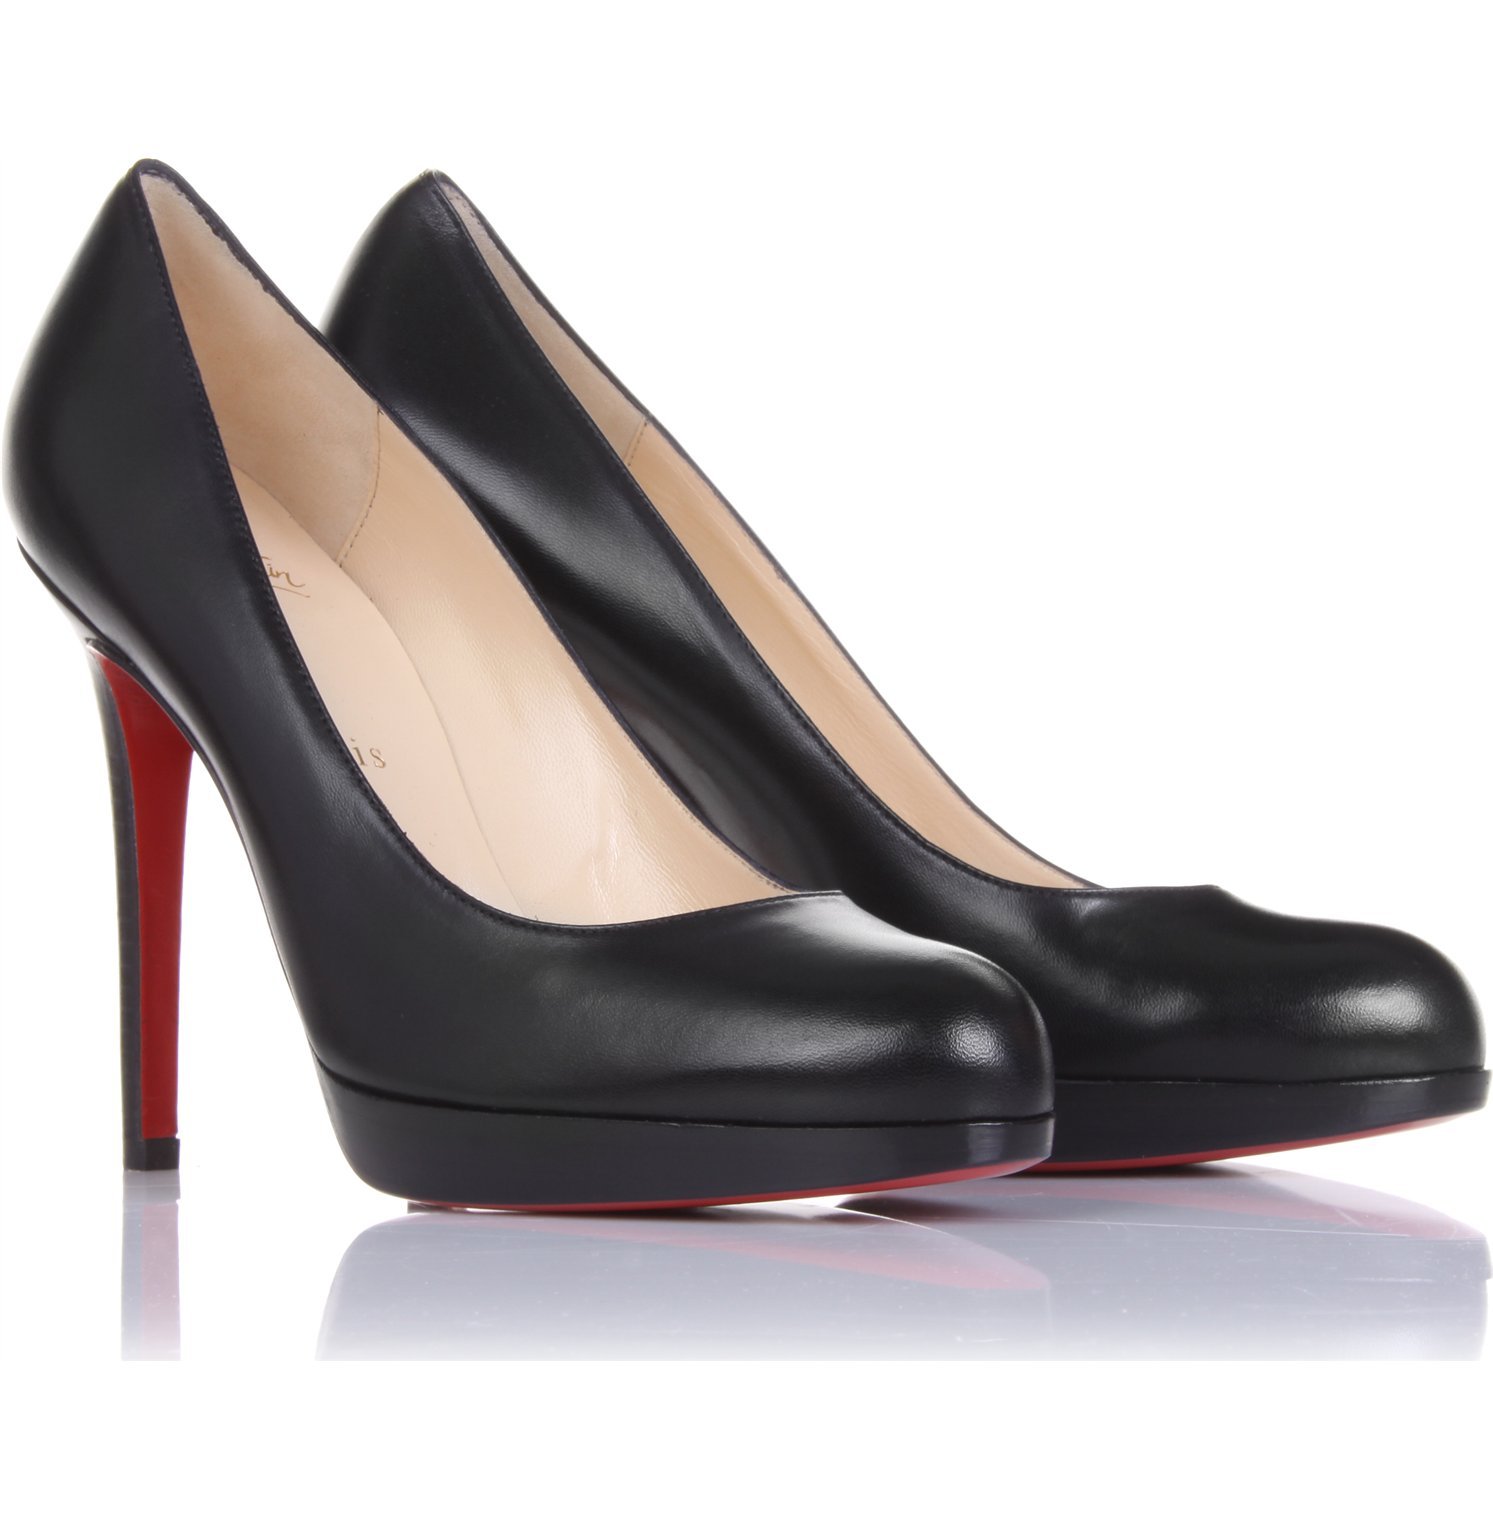 christian louboutin New Simple pumps Black suede round toes | The ...